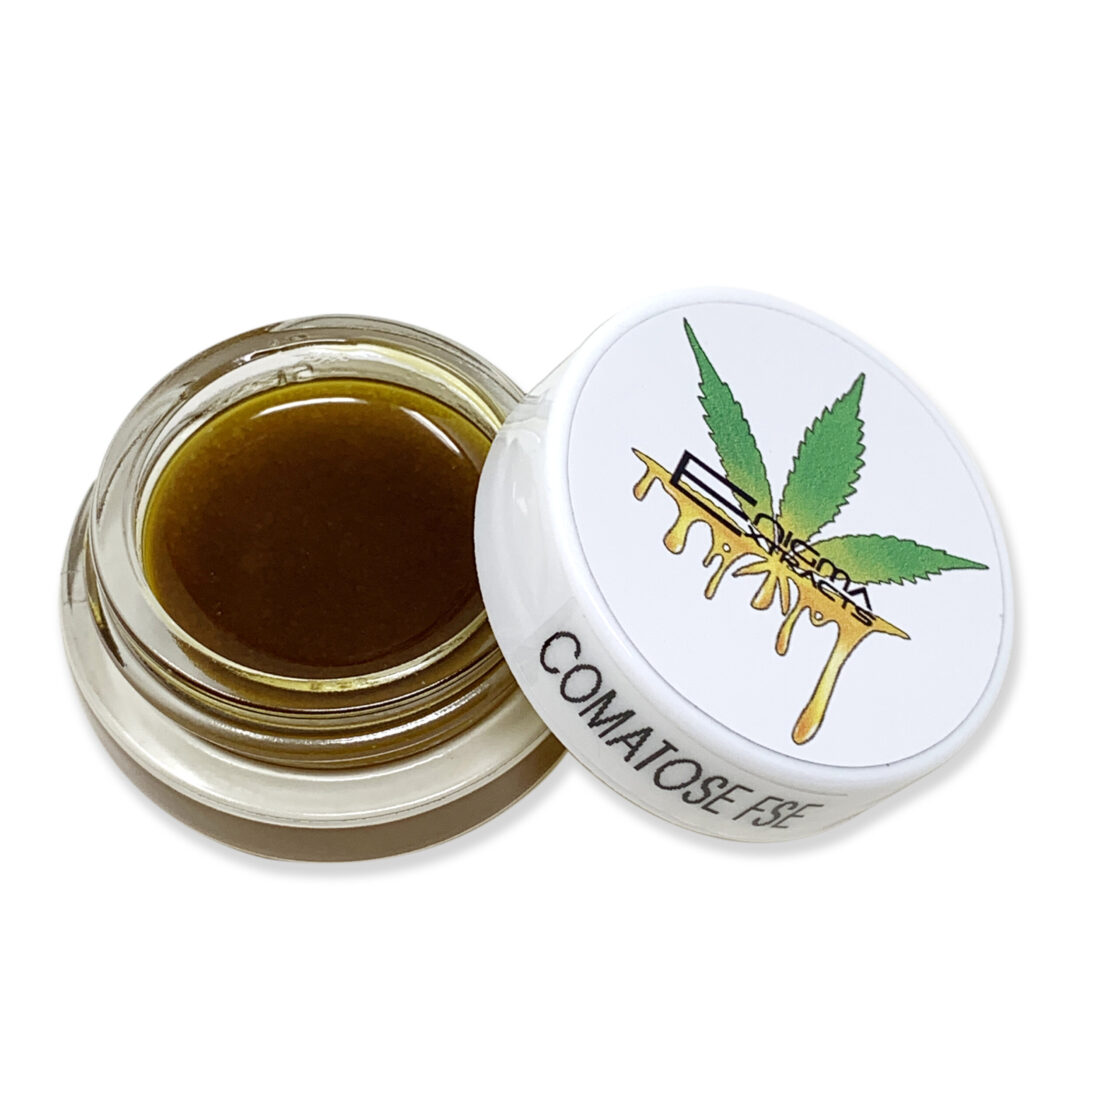 Enigma Extracts – Budget Baller Jar (3.5g) – Comatose